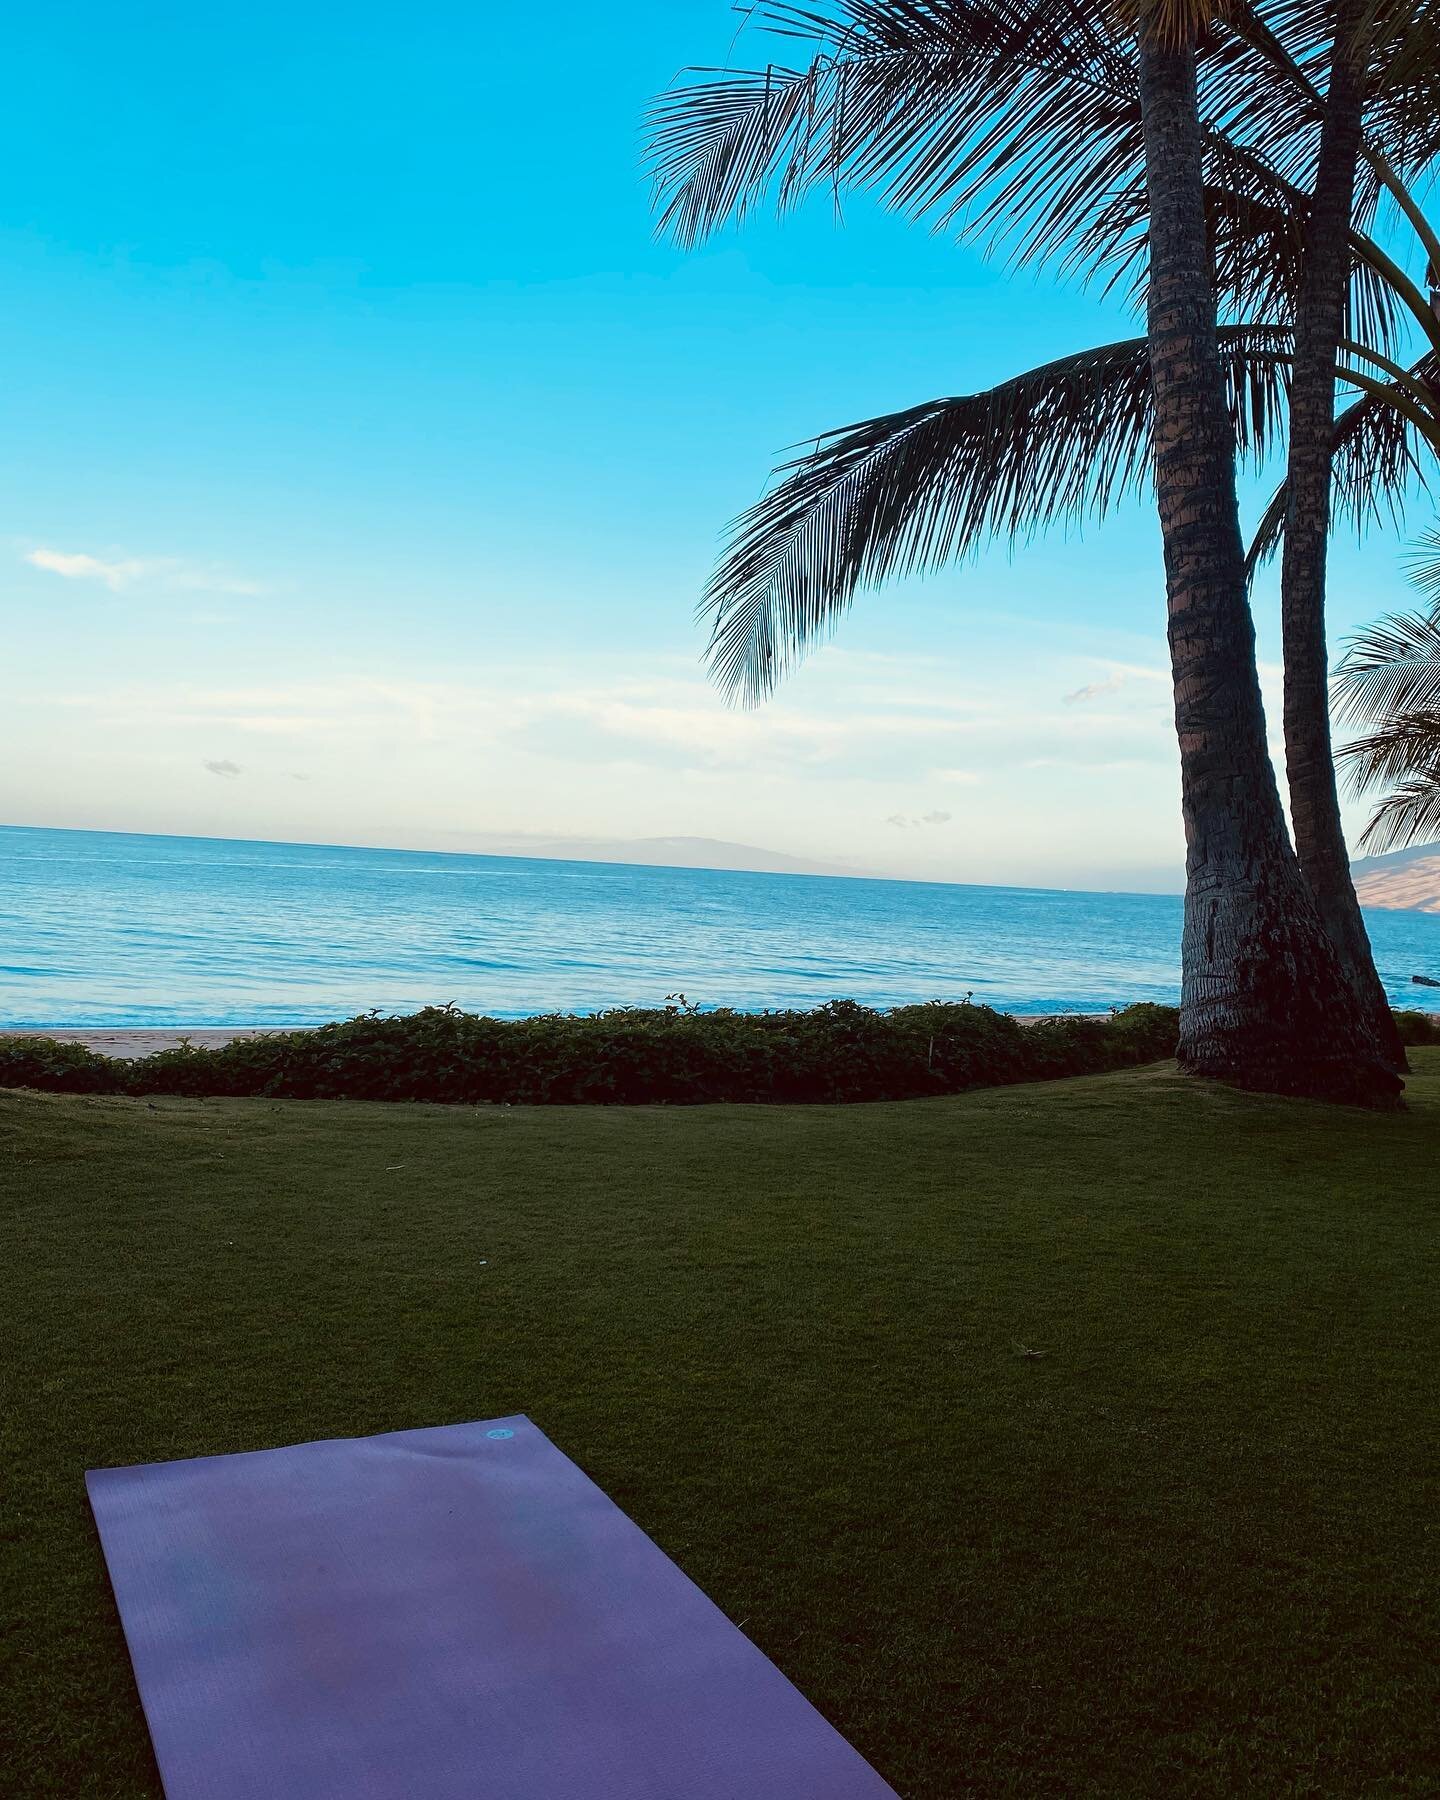 Last week I was so lucky to be able to roll out of bed and practice every morning right here!! It felt so blissful to reconnect to my practice, myself and nature during Spring Break on Maui. I plan to bring some island vibes to my class this Friday a